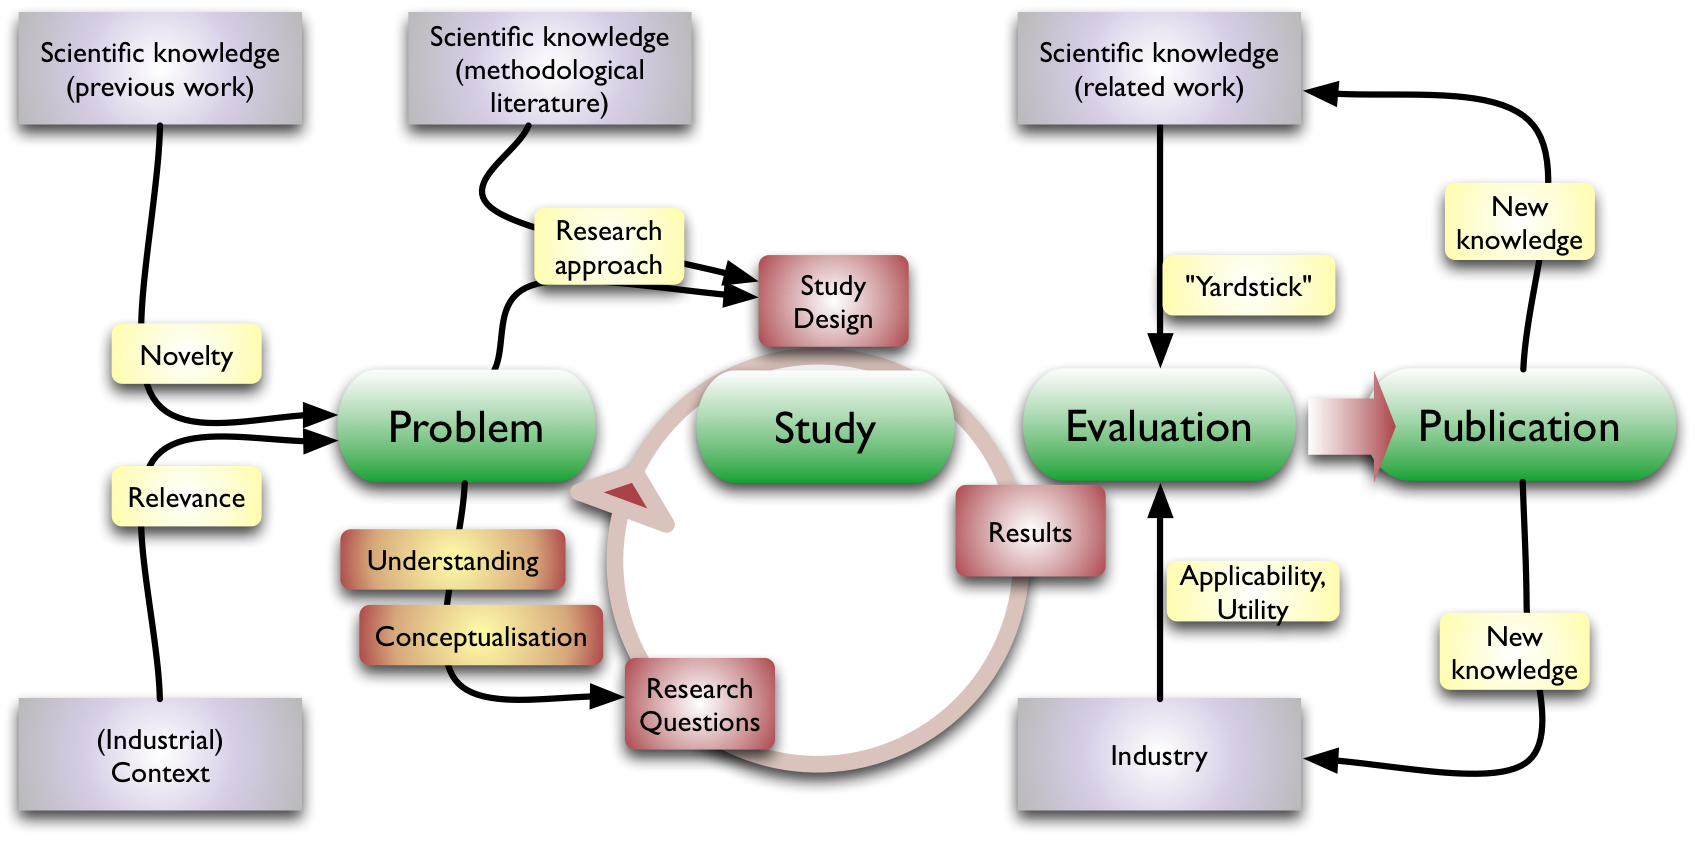 Buy research papers online no plagiarism